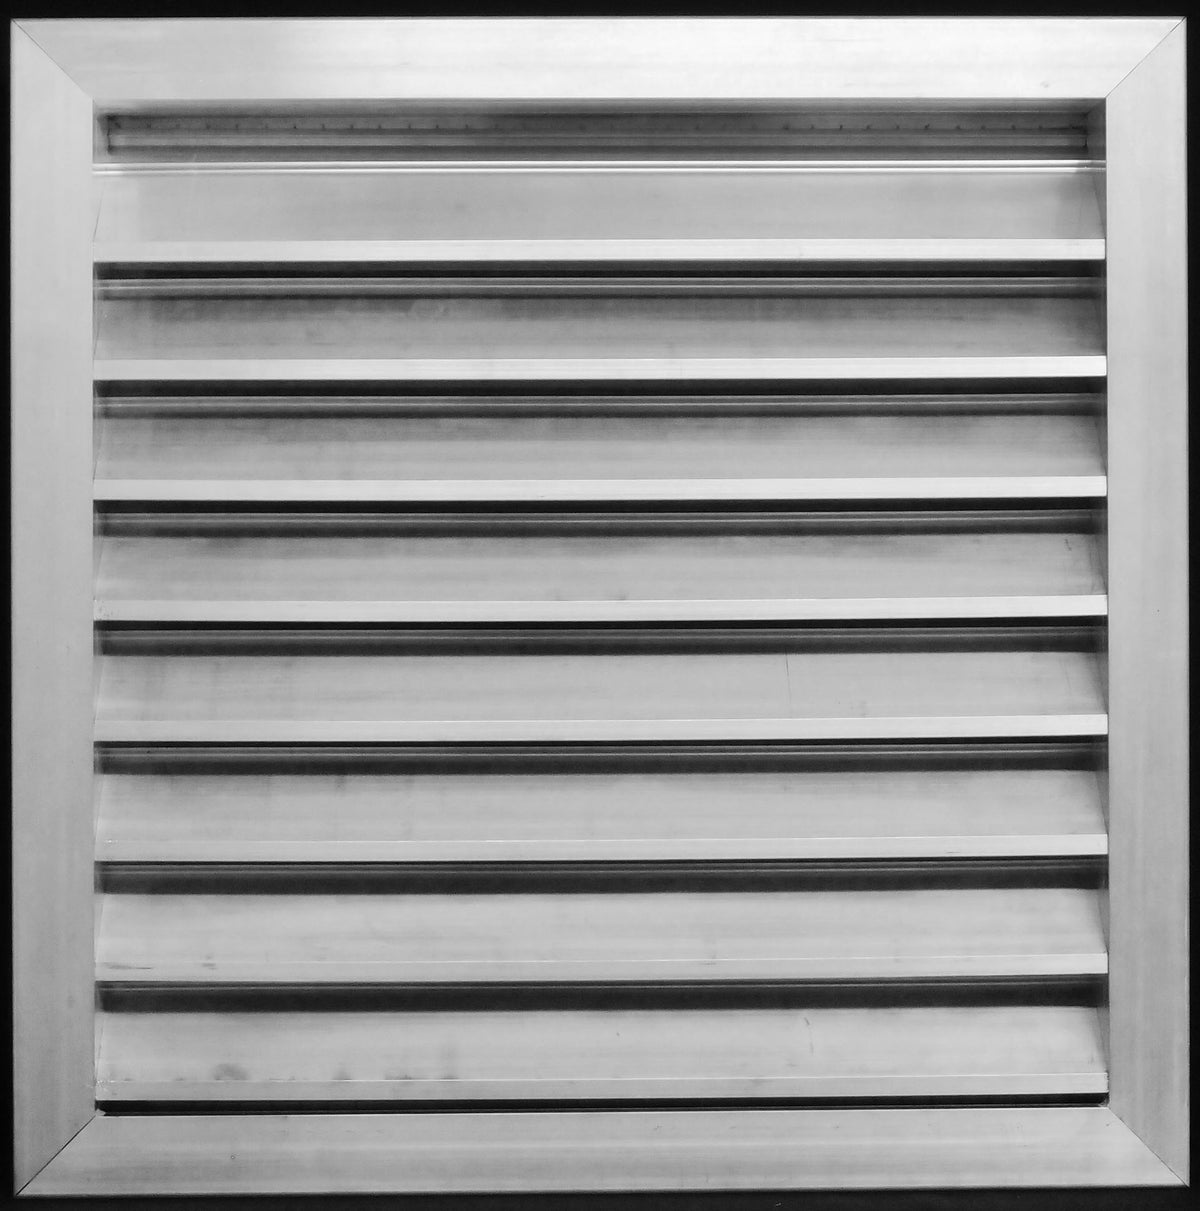 24&quot;w X 24&quot;h Aluminum Outdoor Weather Proof Louvers - Rain &amp; Waterproof Air Vent With Screen Mesh